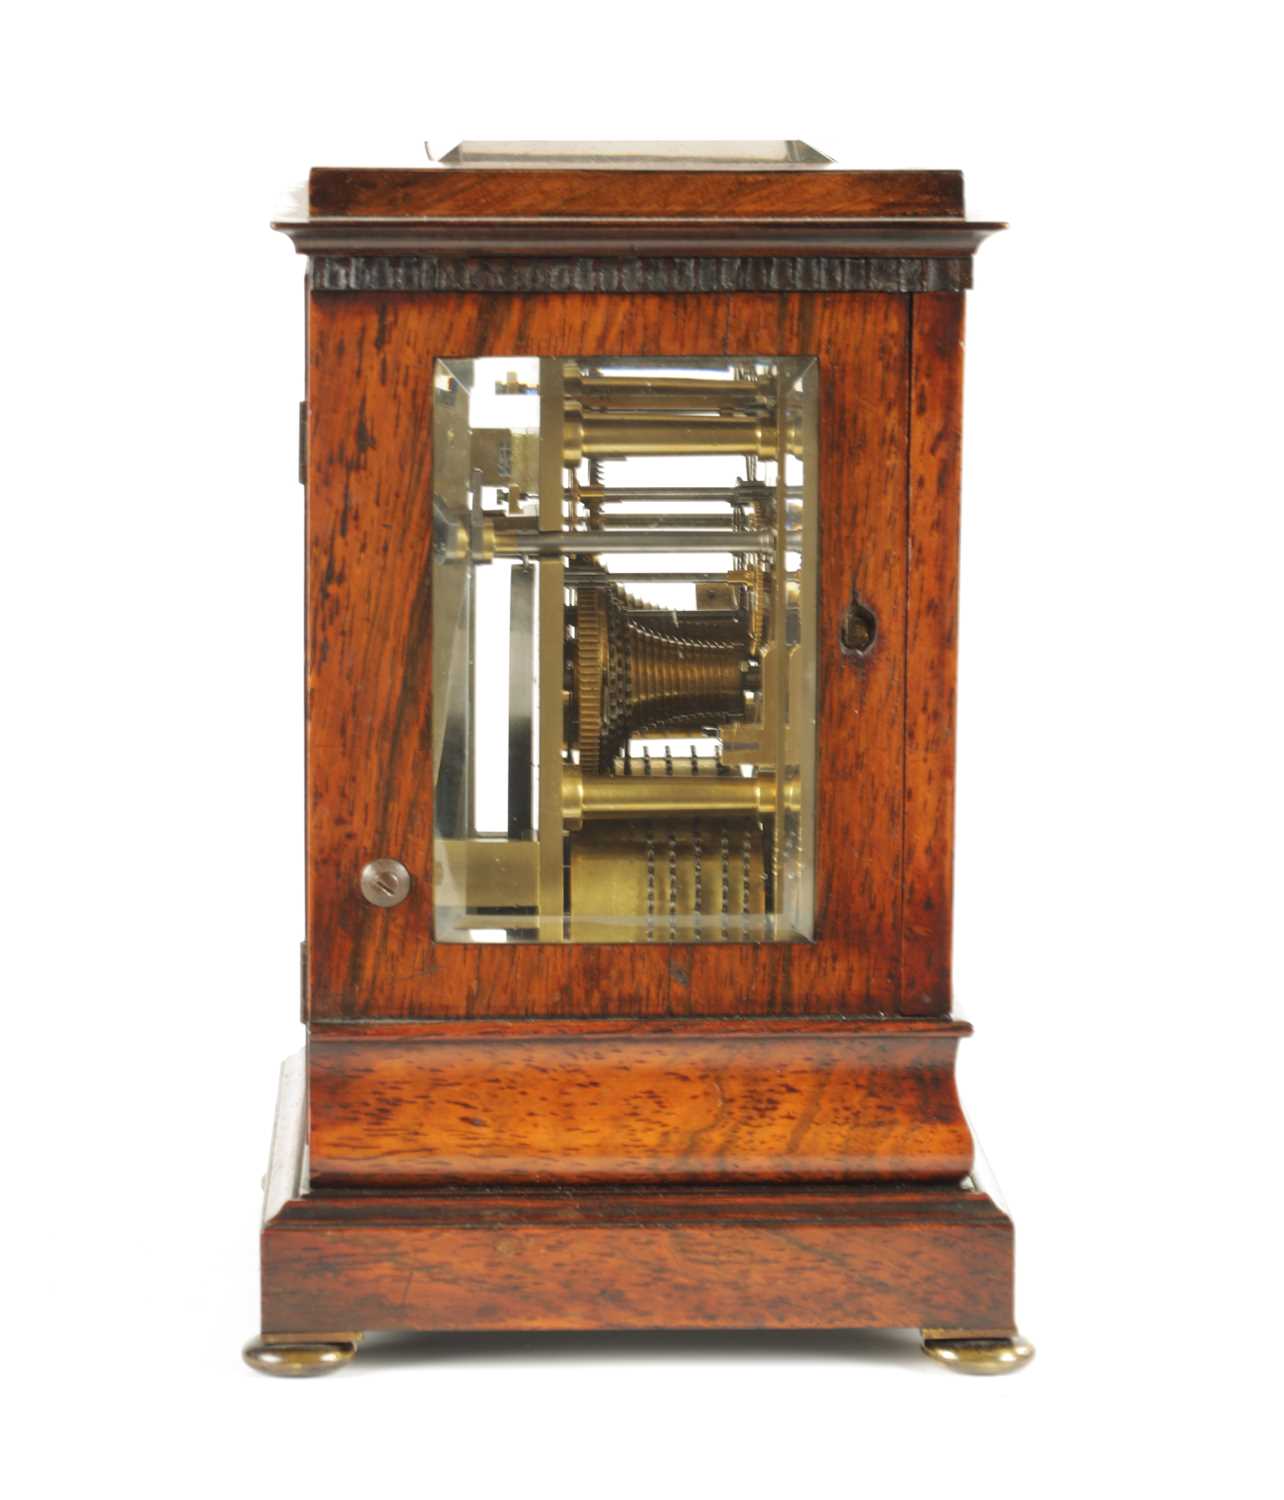 FRODSHAM, GRACECHURCH STREET, LONDON. A FINE AND SMALL ROSEWOOD DOUBLE FUSEE LIBRARY CLOCK WITH LEVE - Image 2 of 13